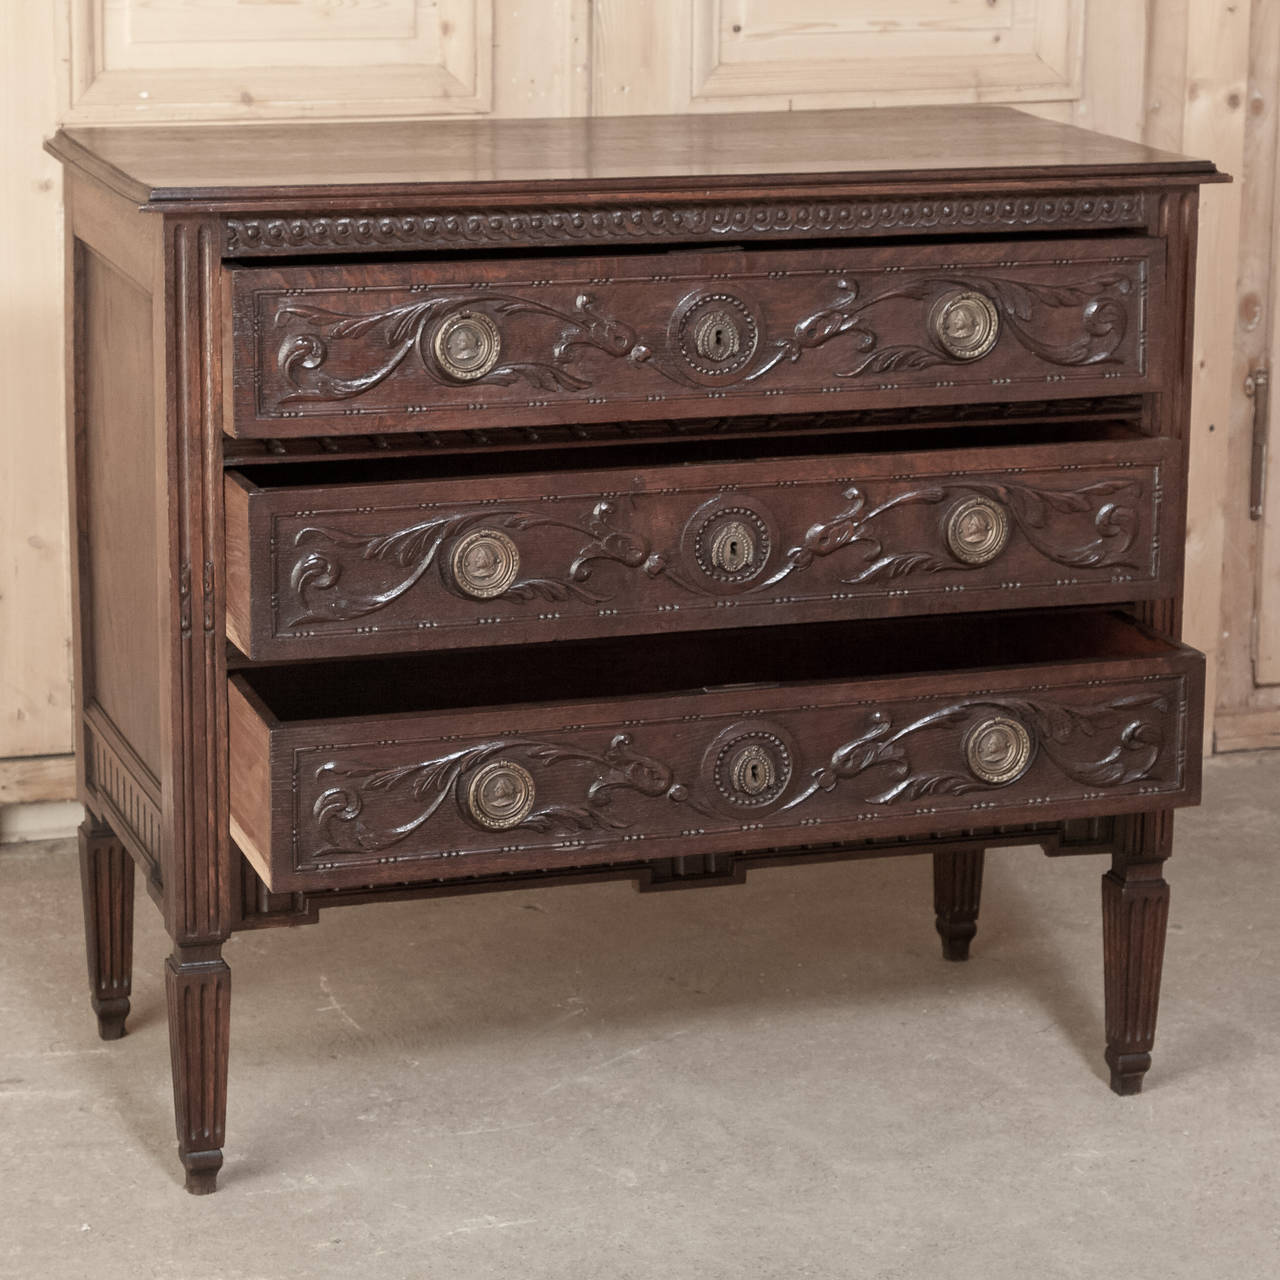 This country French commode was carved in the style of Louis XVI from solid old-growth oak and features its original cast brass pulls and keyguards!
Measures 36 H x 39.5 W x 19.5 D.
circa 1870.